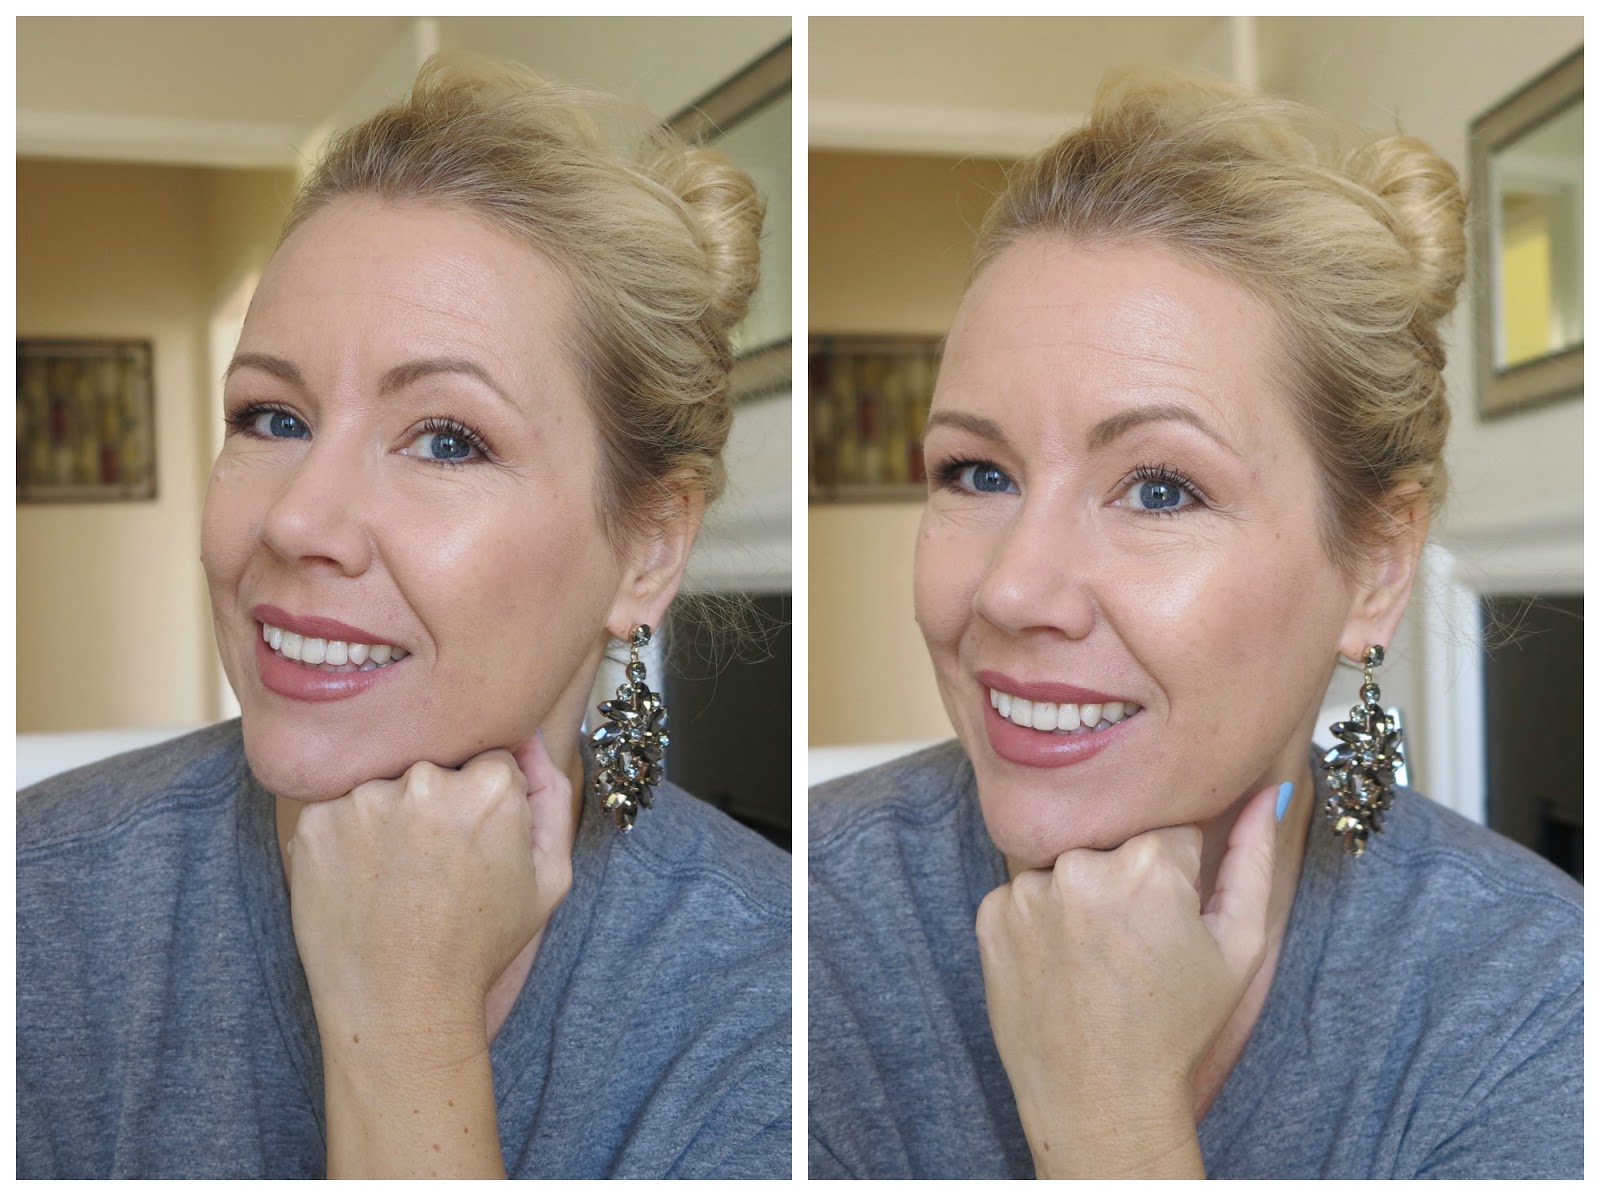 Why and How To Apply Eye Lid Tape on Hooded Eyes 